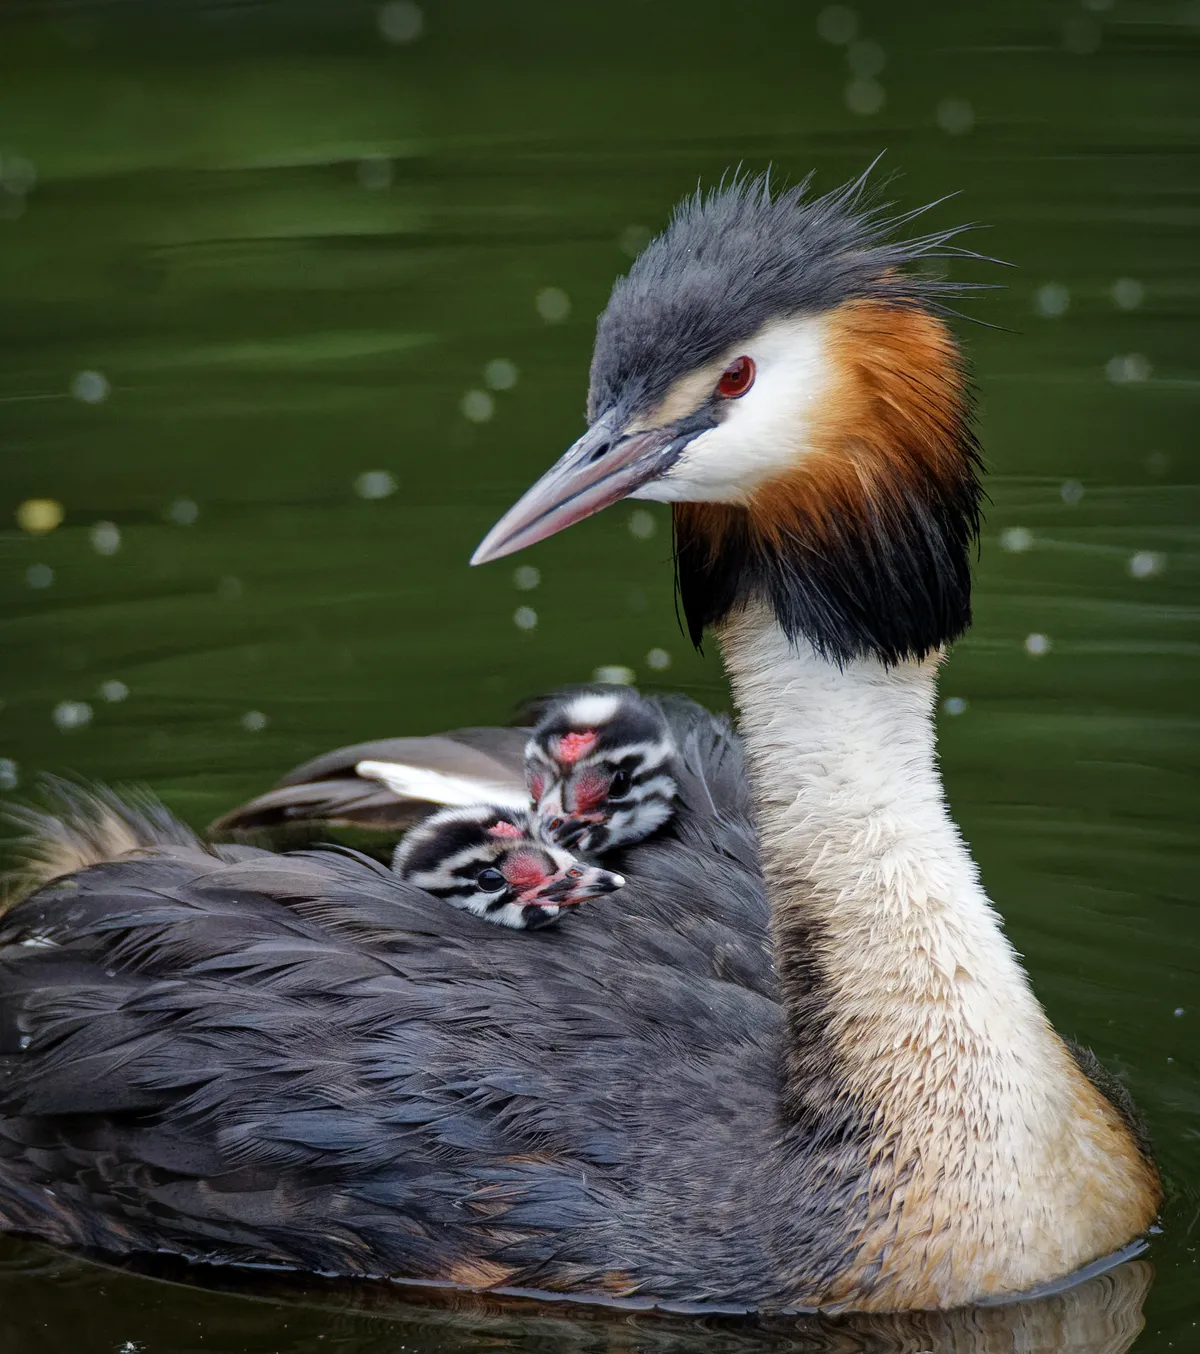 The heads of two young black and white chicks poke out from between the wings of an adult great crested grebe.